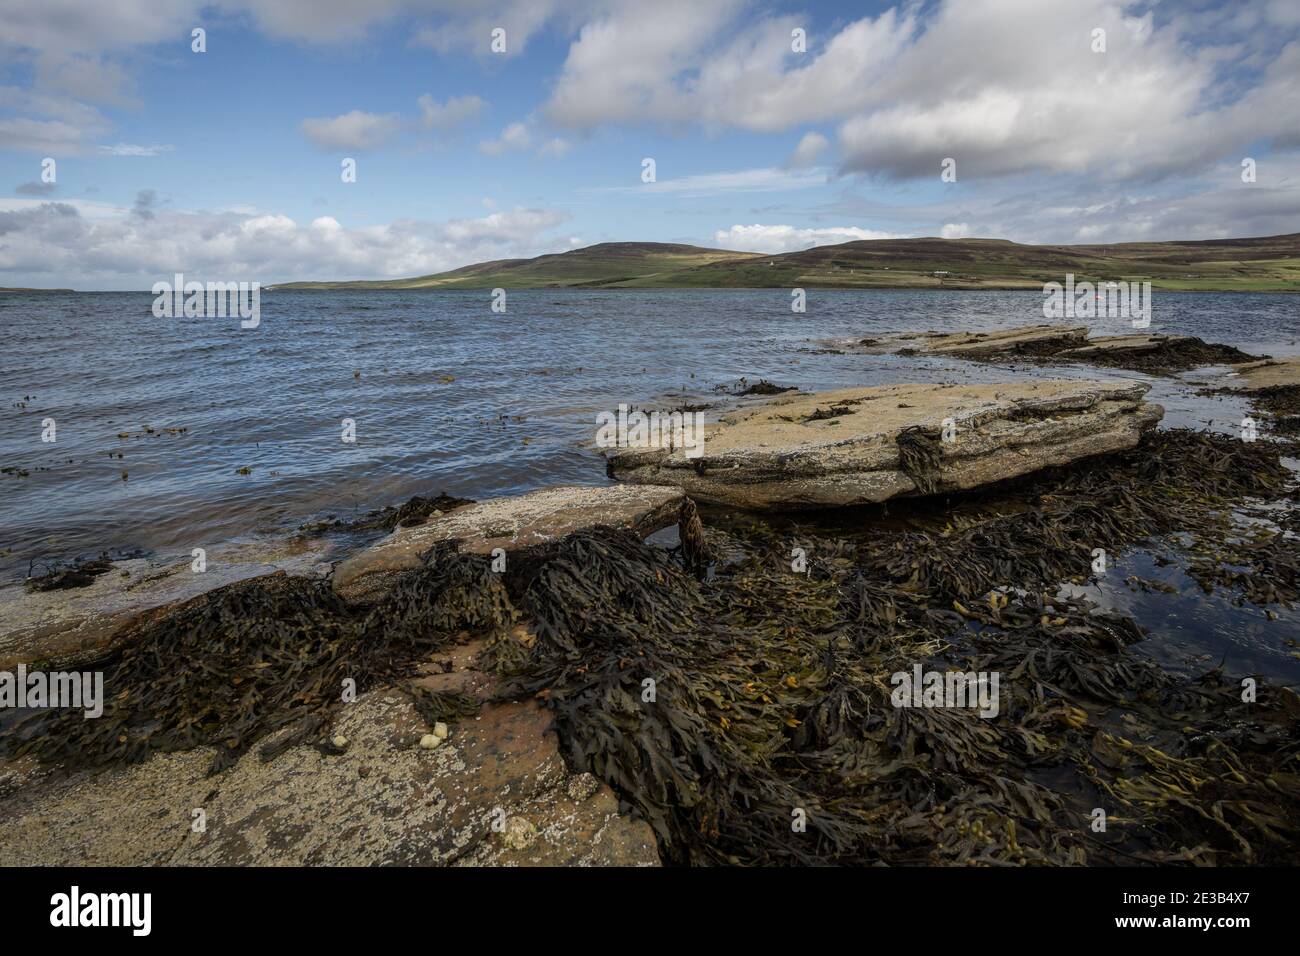 View across Eynhallow Sound from the rocks under the Broch of Gurness looking towards the island of Rousay Stock Photo